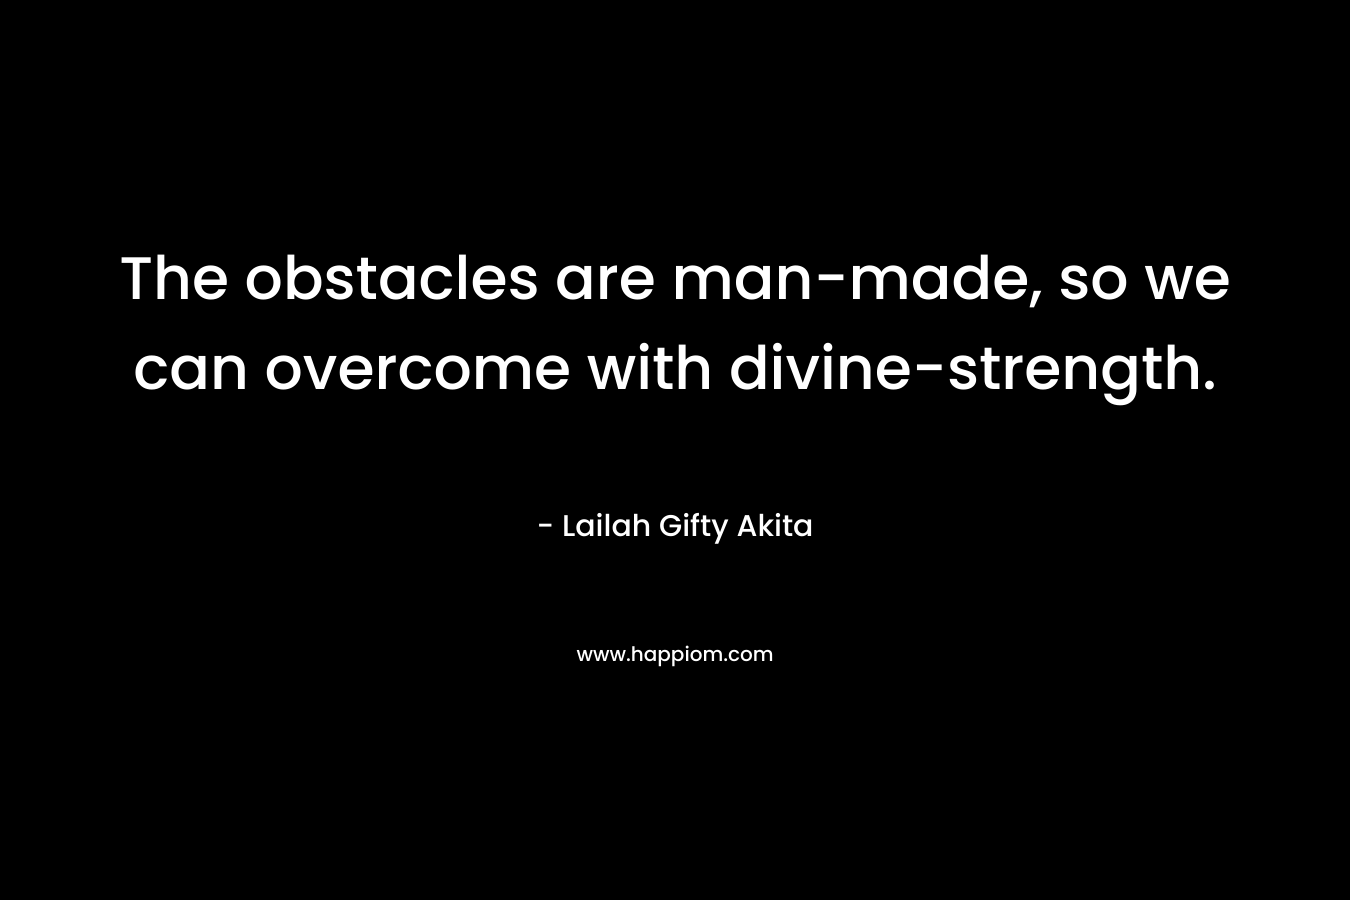 The obstacles are man-made, so we can overcome with divine-strength.